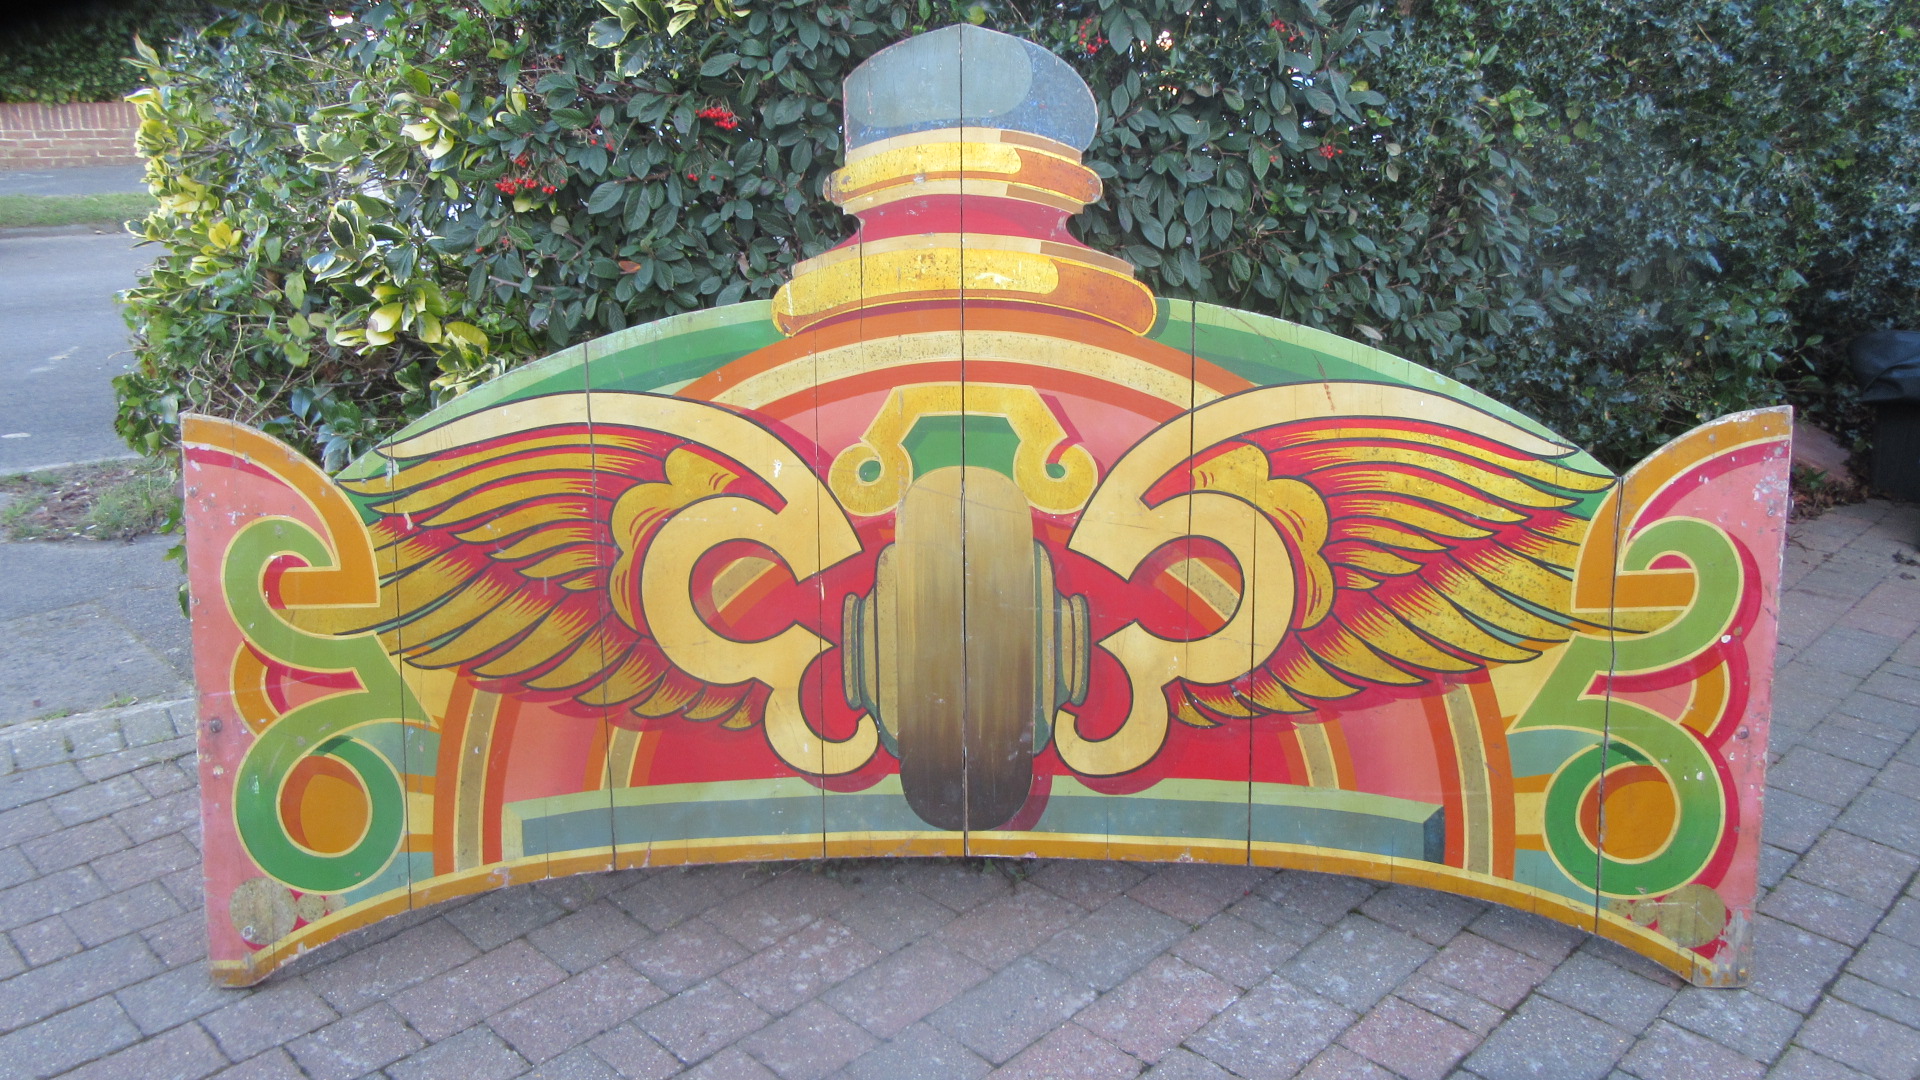 ANTIQUE 1930S FAIRGROUND ROUNDING BOARD FROM ARTHUR NORTHS DODGEMS RIDE PAINTED BY HALL & FOWLE